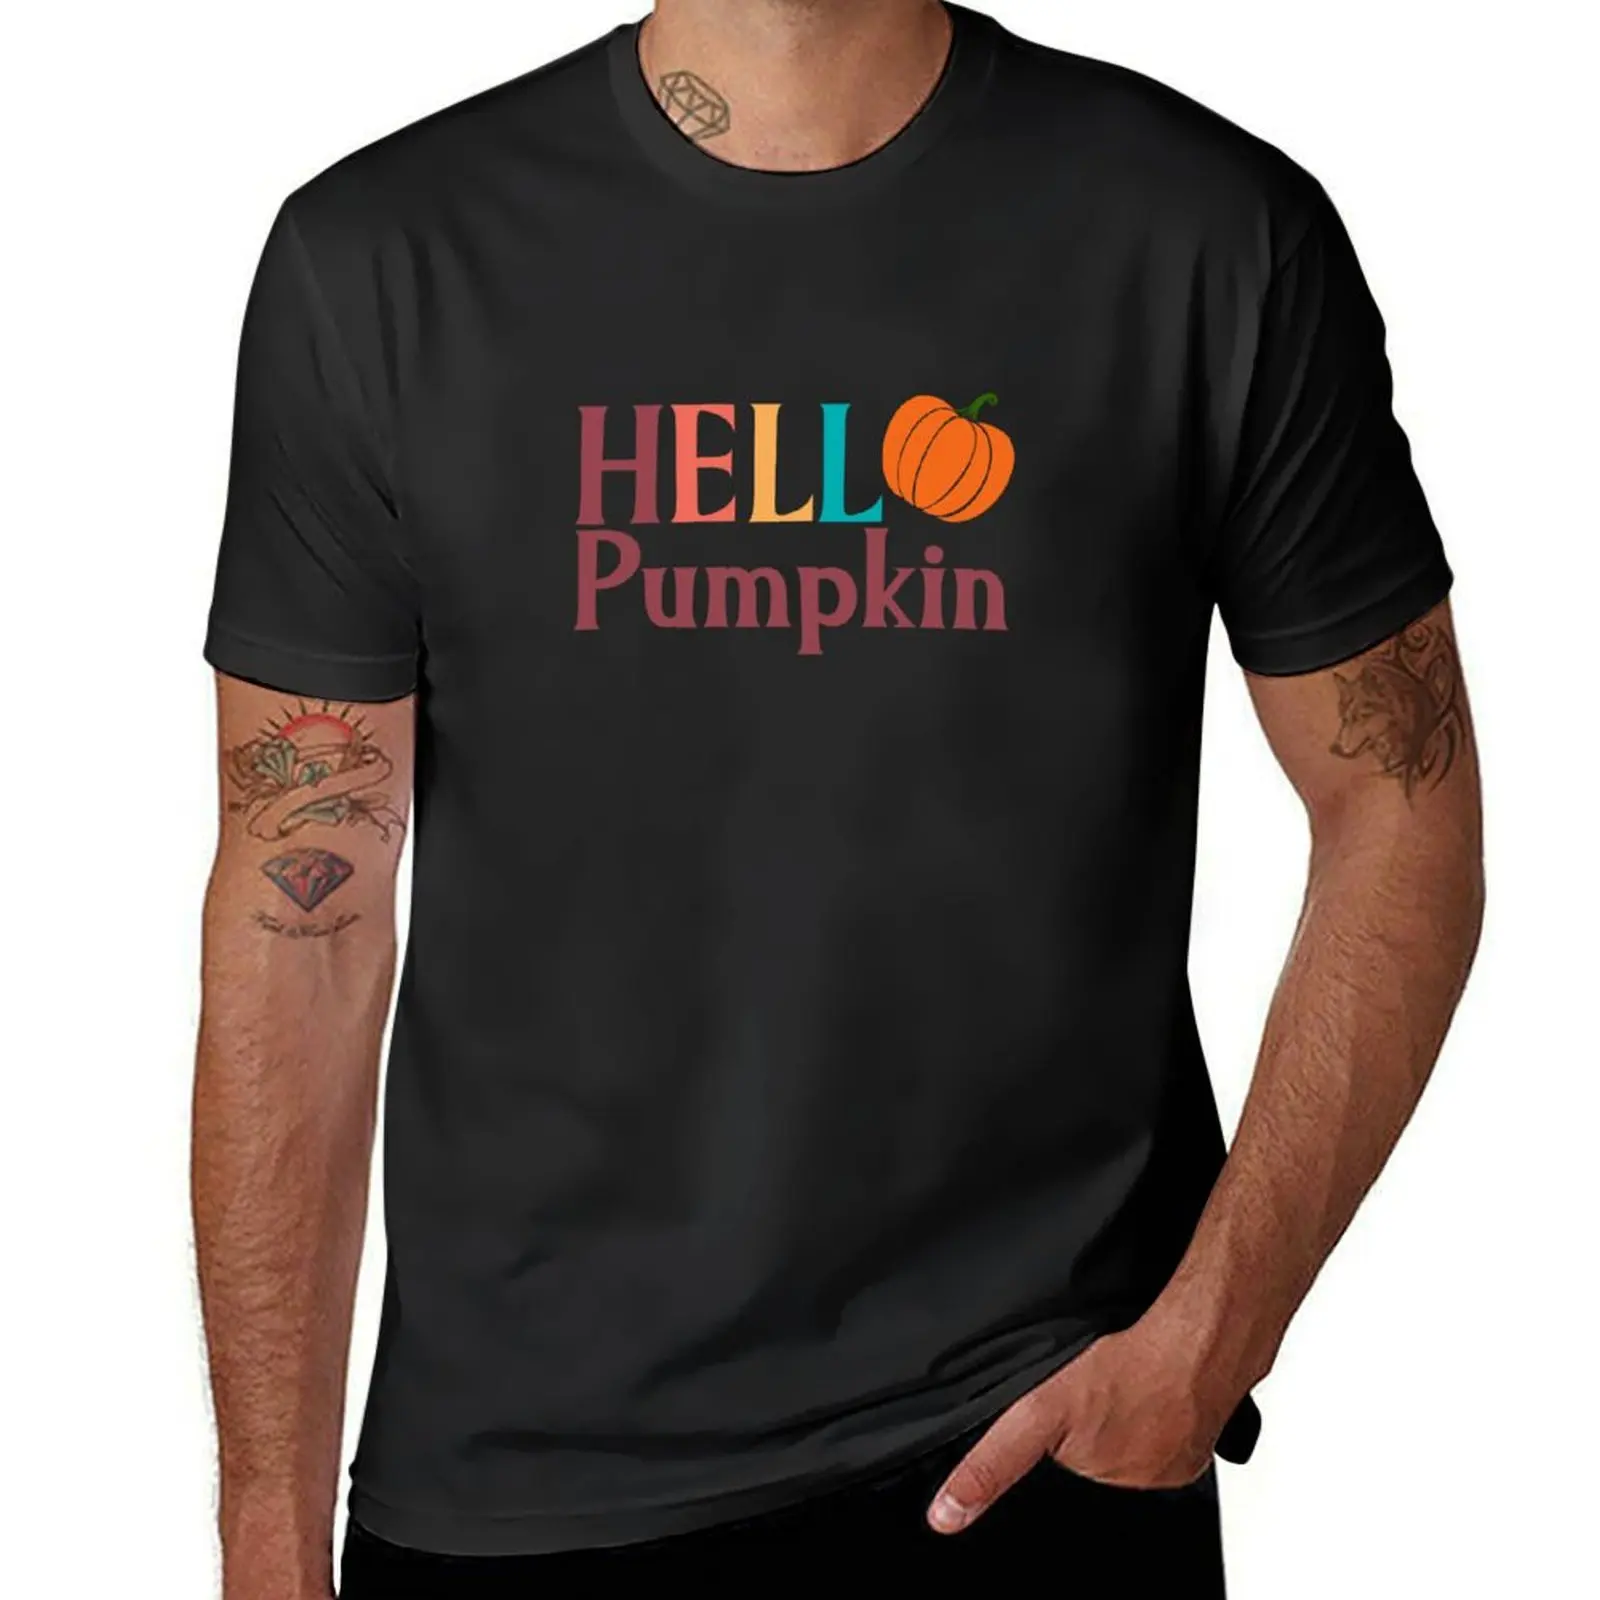 

Hello pumpkin T-shirt shirts graphic tees plus size tops customs design your own boys whites clothes for men